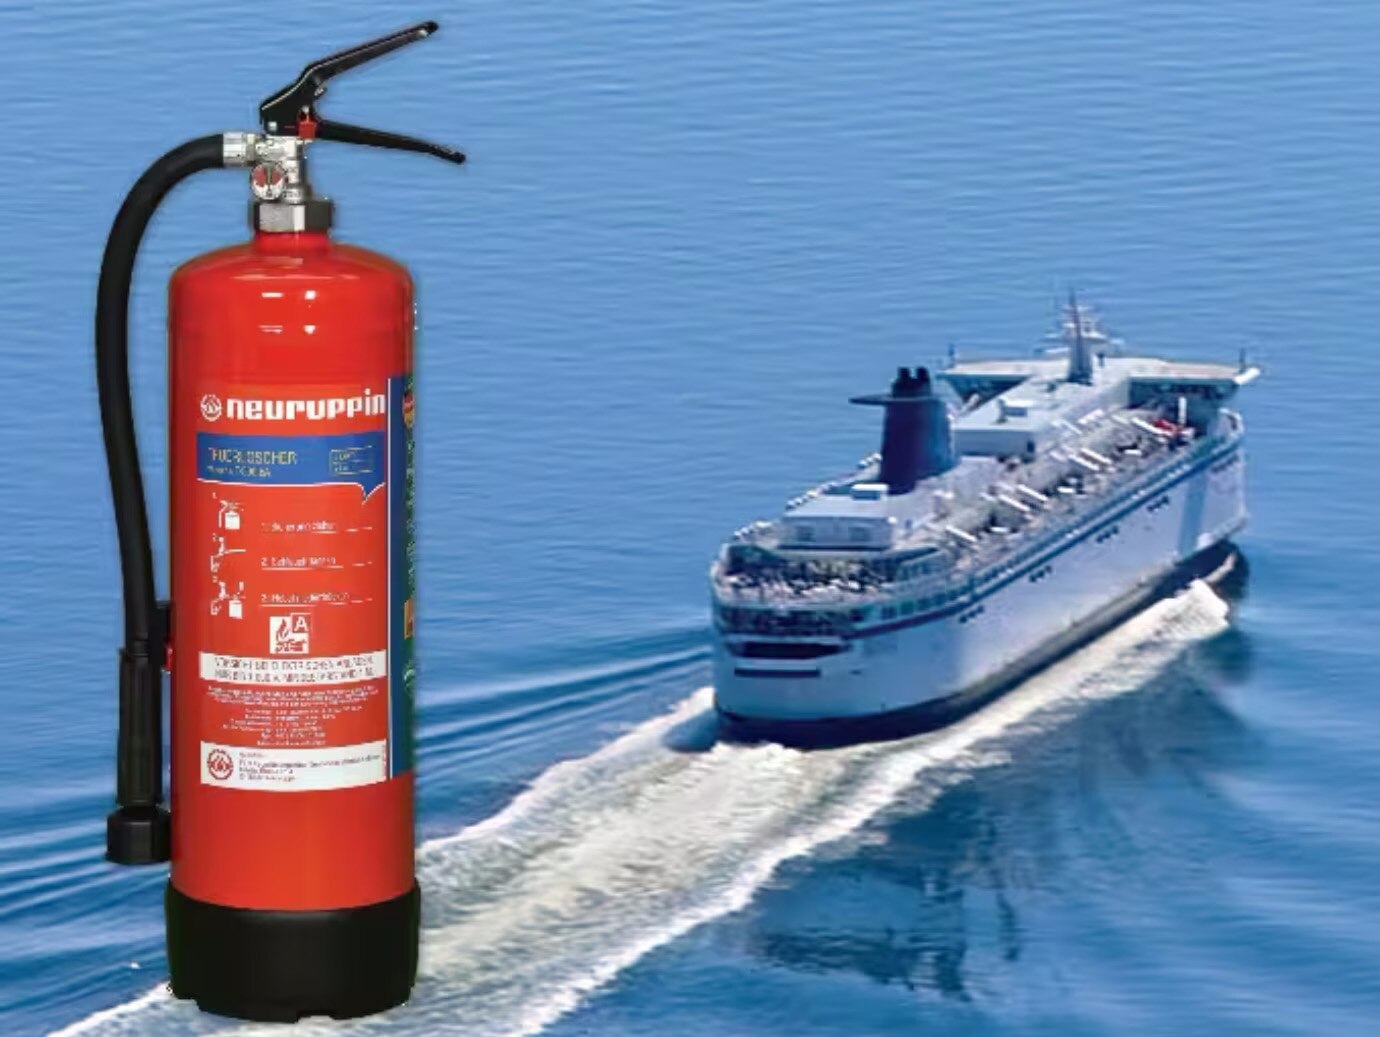 fire extinguisher with ship image in the background